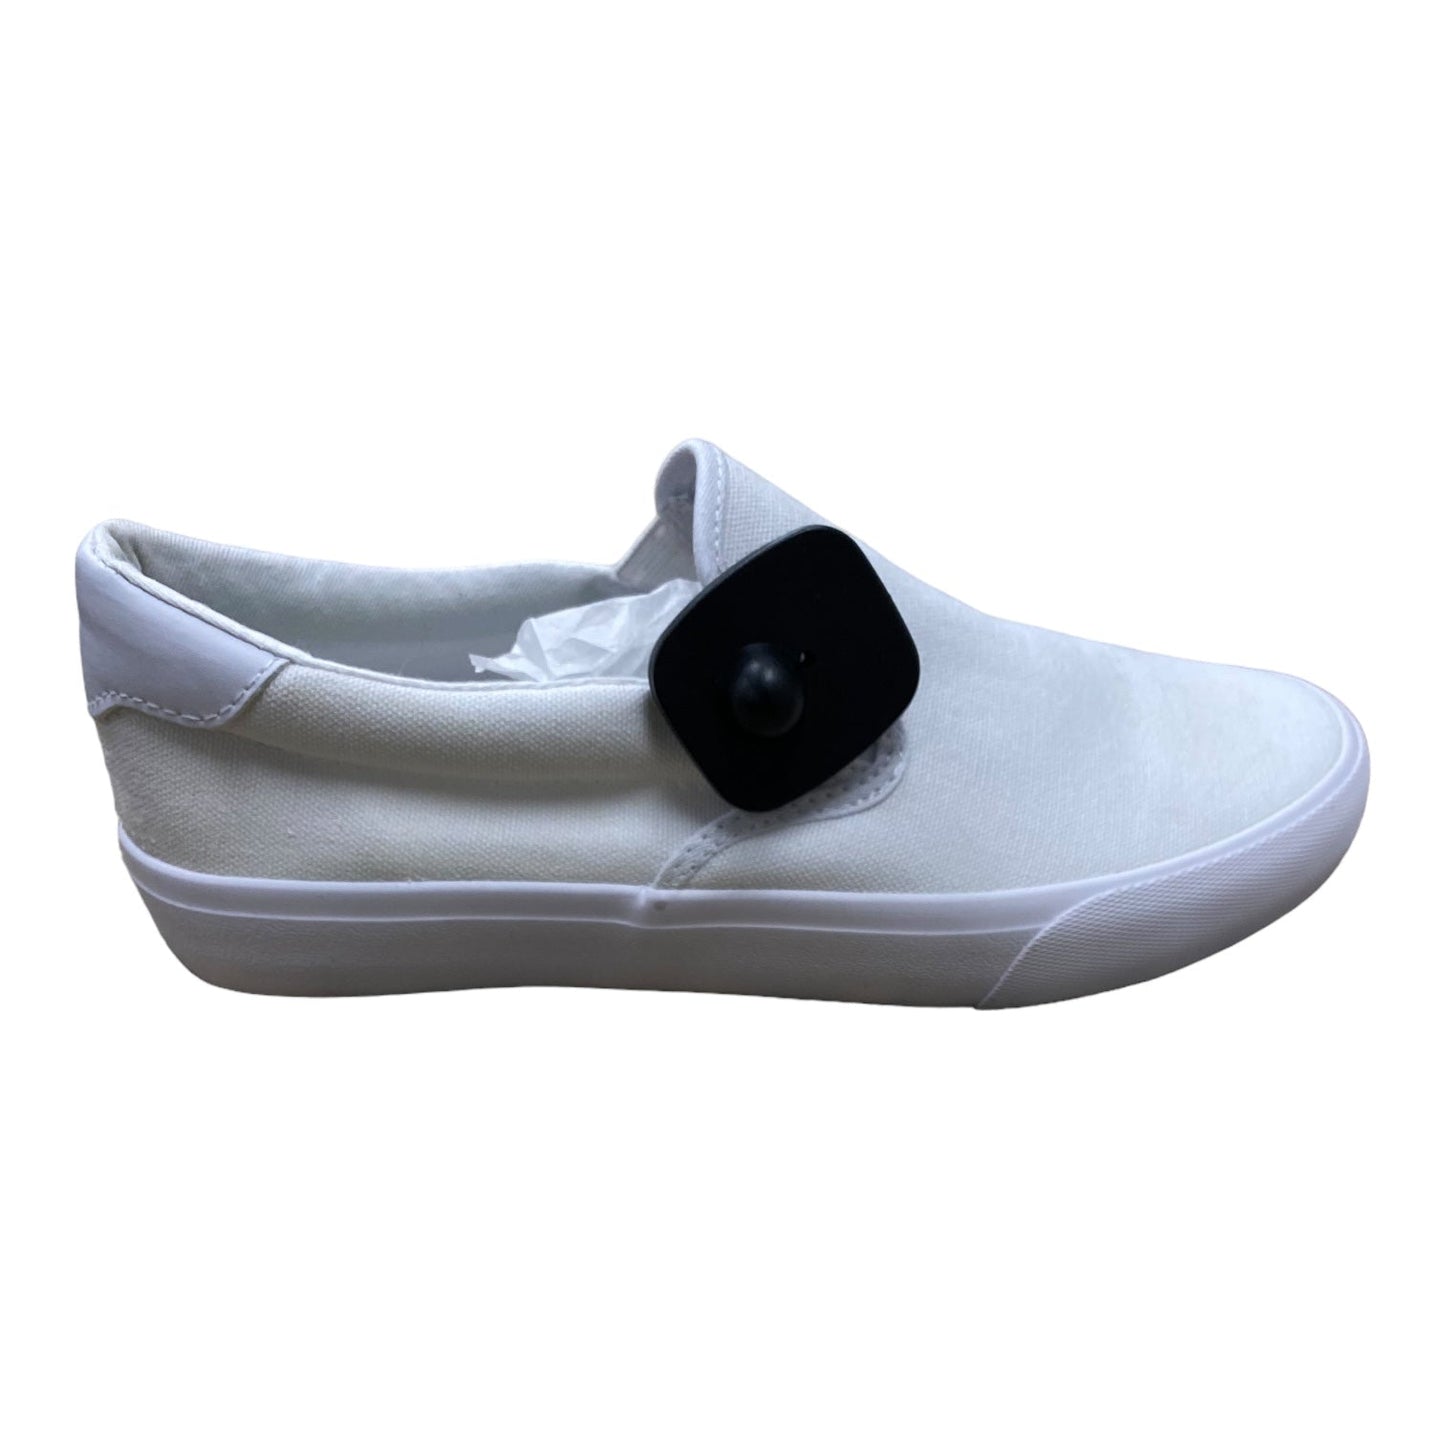 White Shoes Sneakers LUGZ - AS IS, Size 10